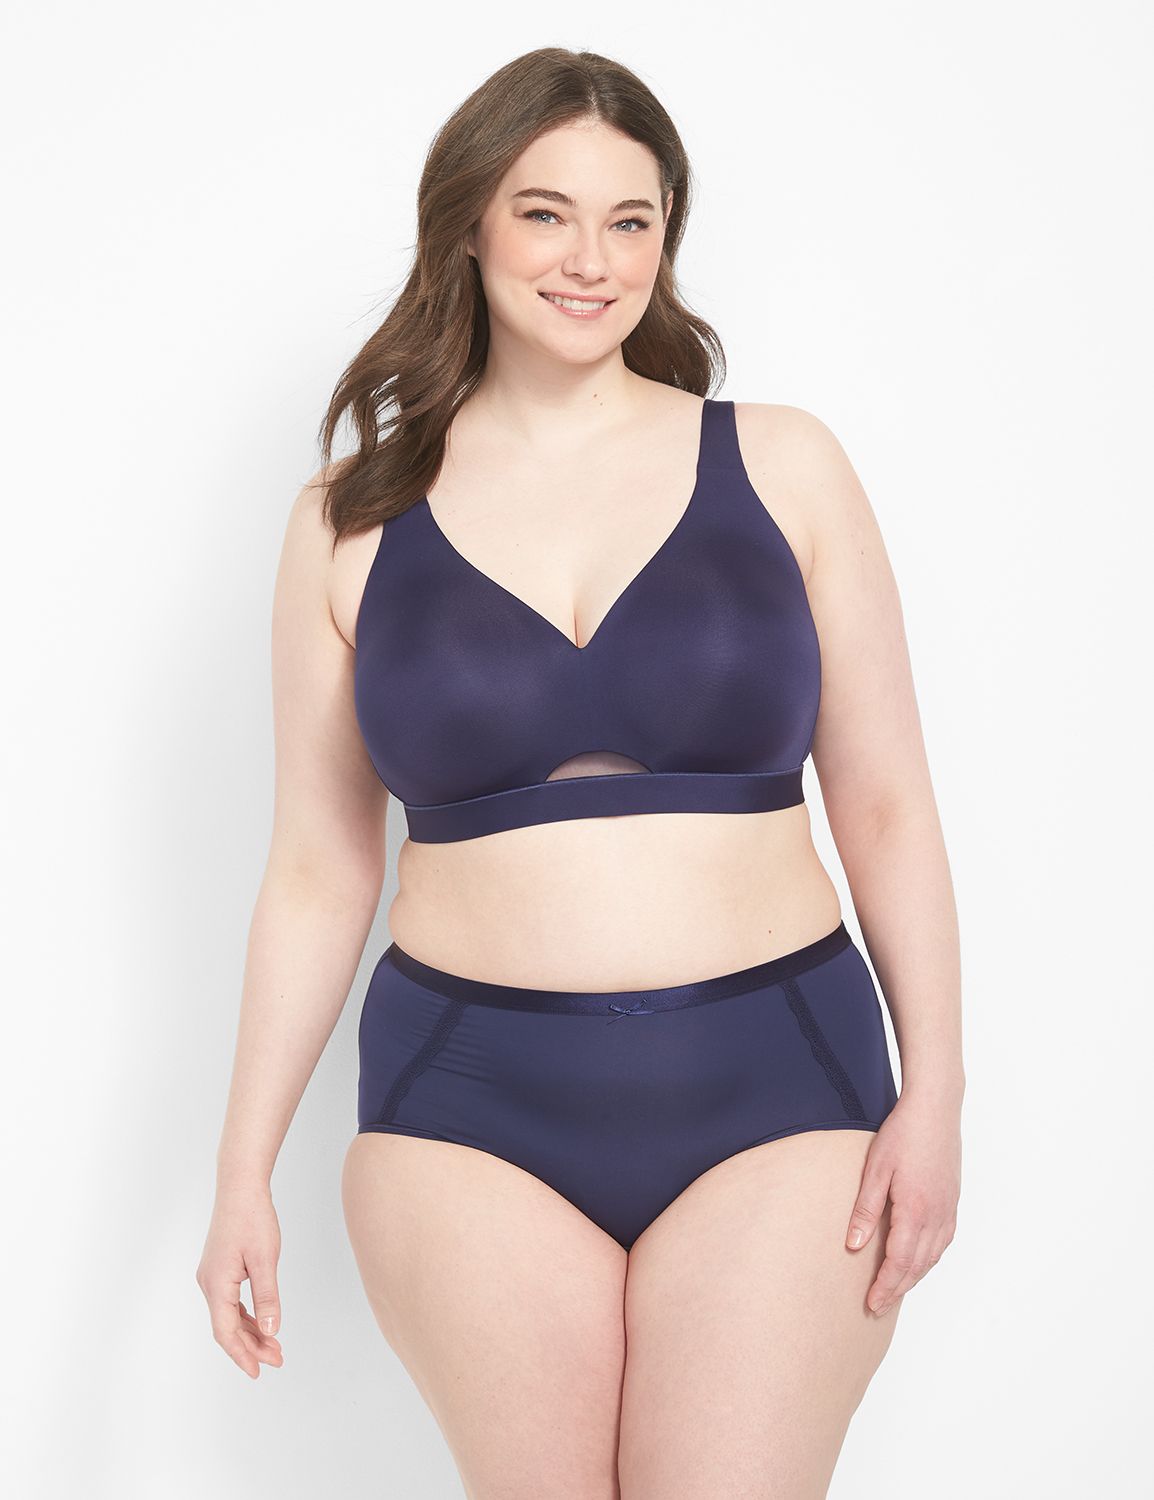 Lane Bryant - When panties are 5/$29, it's time for a little booty